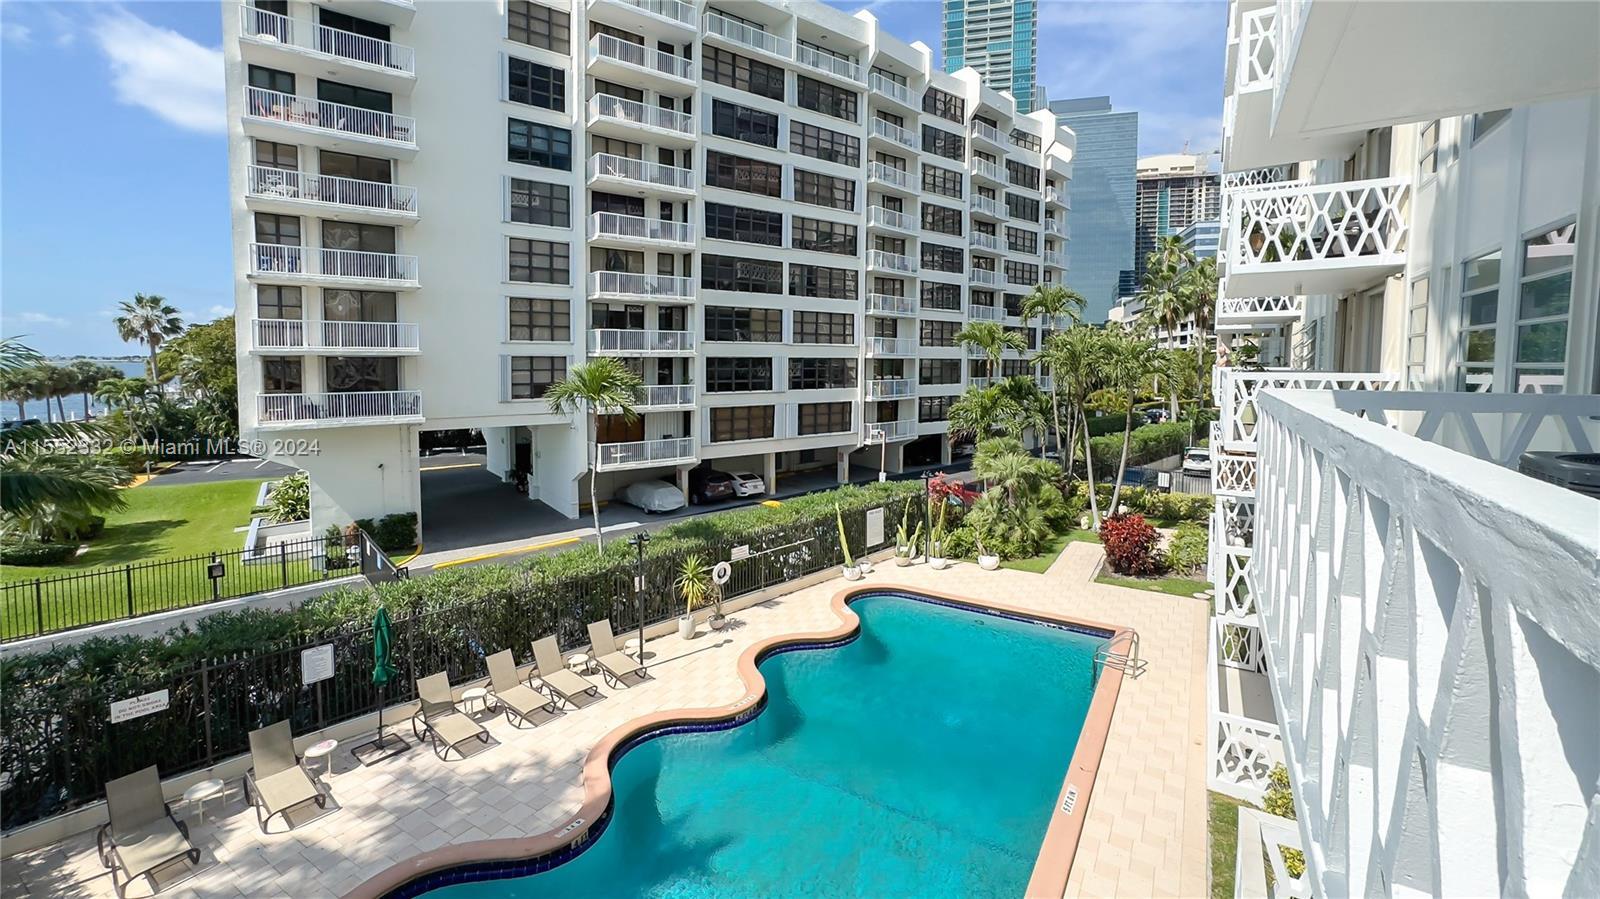 Apartment with Ocean View in Brickell

This stunning 2-bedroom, 2-bathroom apartment offers an exc